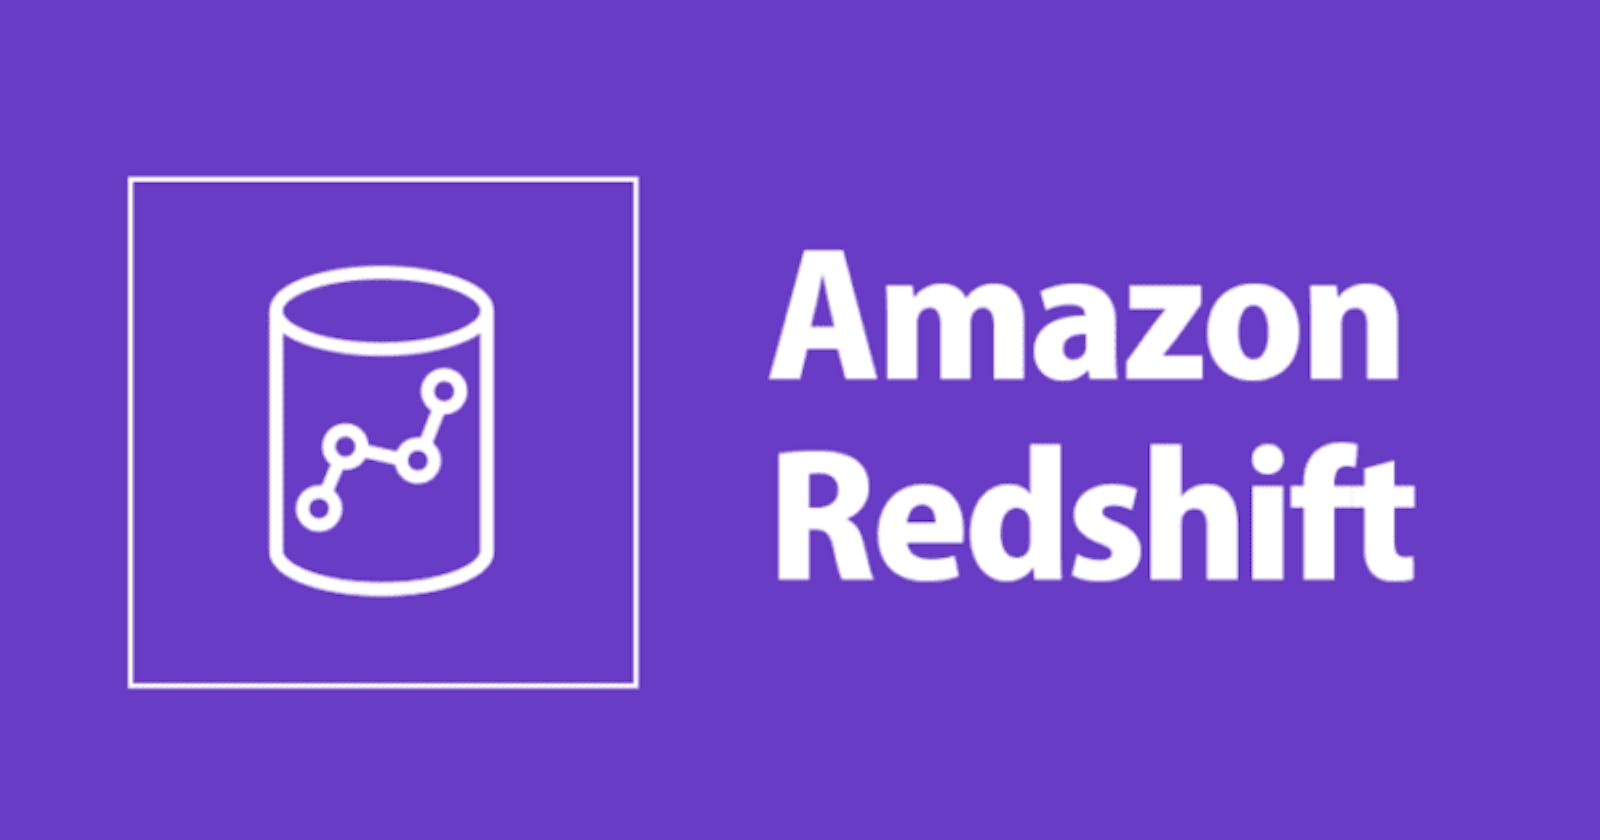 Introduction to Amazon Redshift